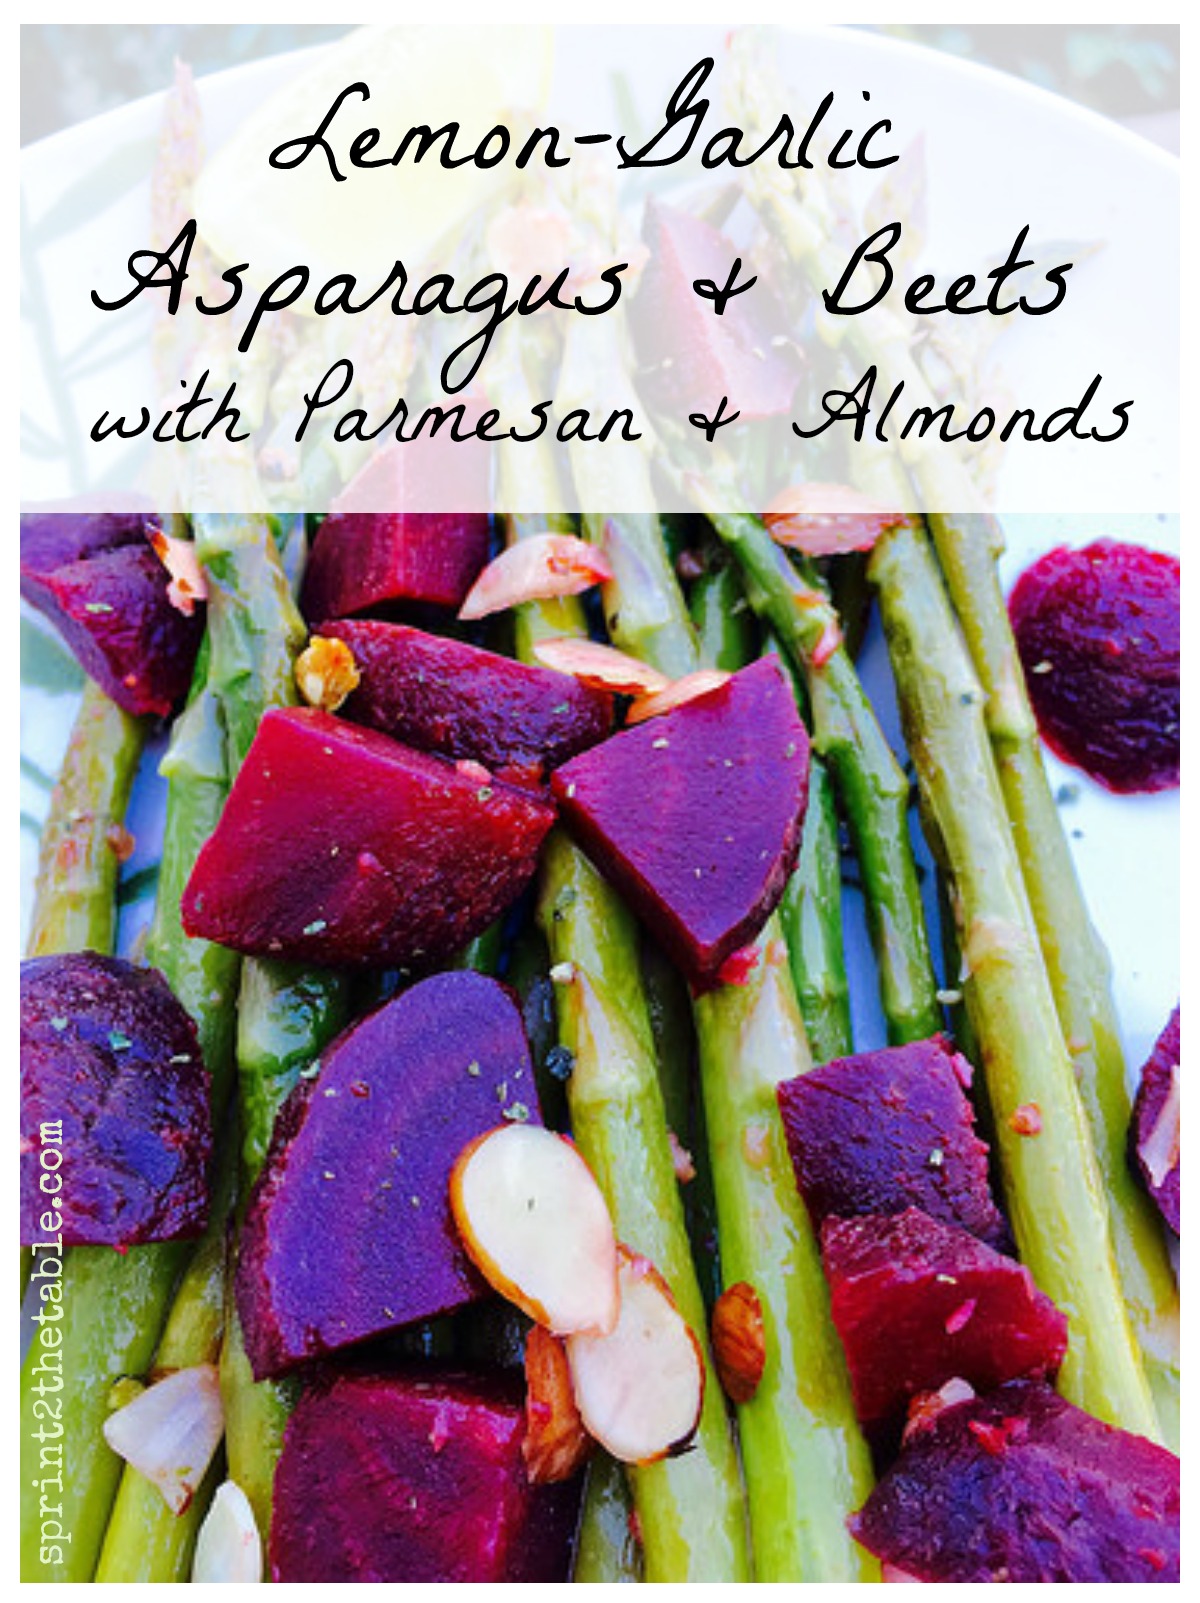 Lemon-Garlic Asparagus & Beets with Parmesan & Almonds. Perfect way to use spring produce! Colorful, healthy... simple to make but it feels oh-so-fancy!